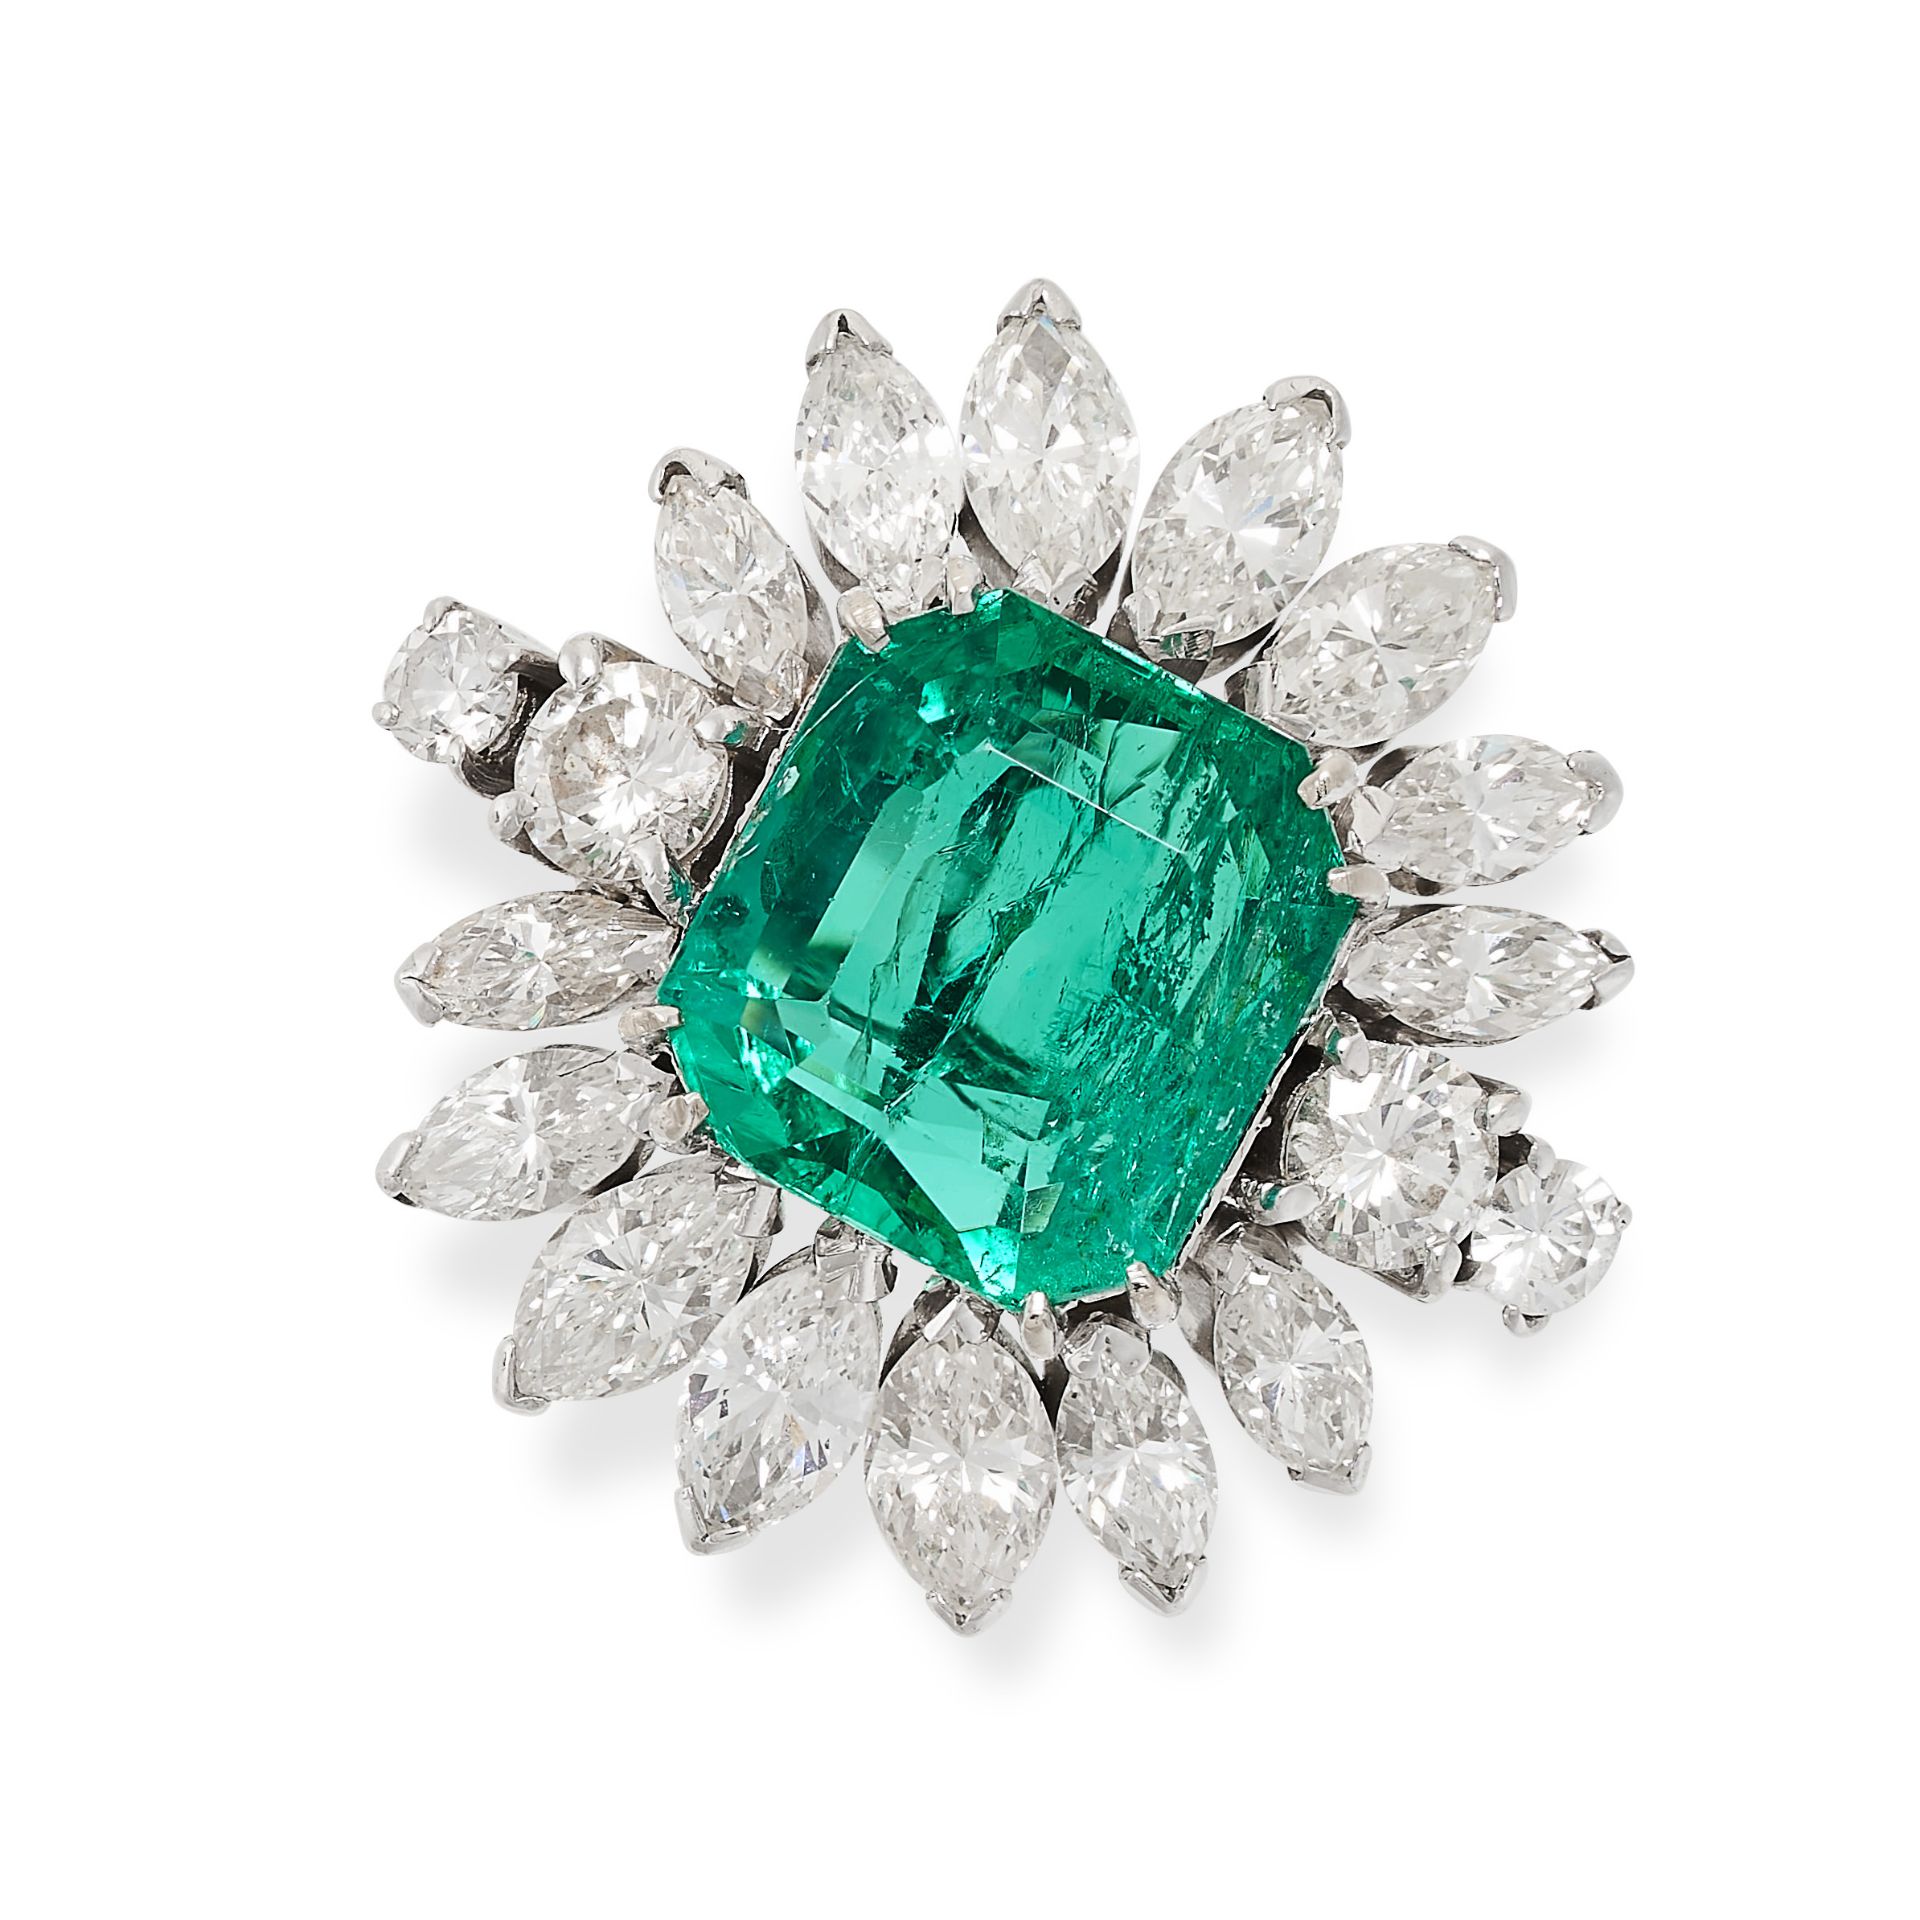 AN EMERALD AND DIAMOND RING set with an octagonal cut emerald of 3.75 carats in a cluster of round